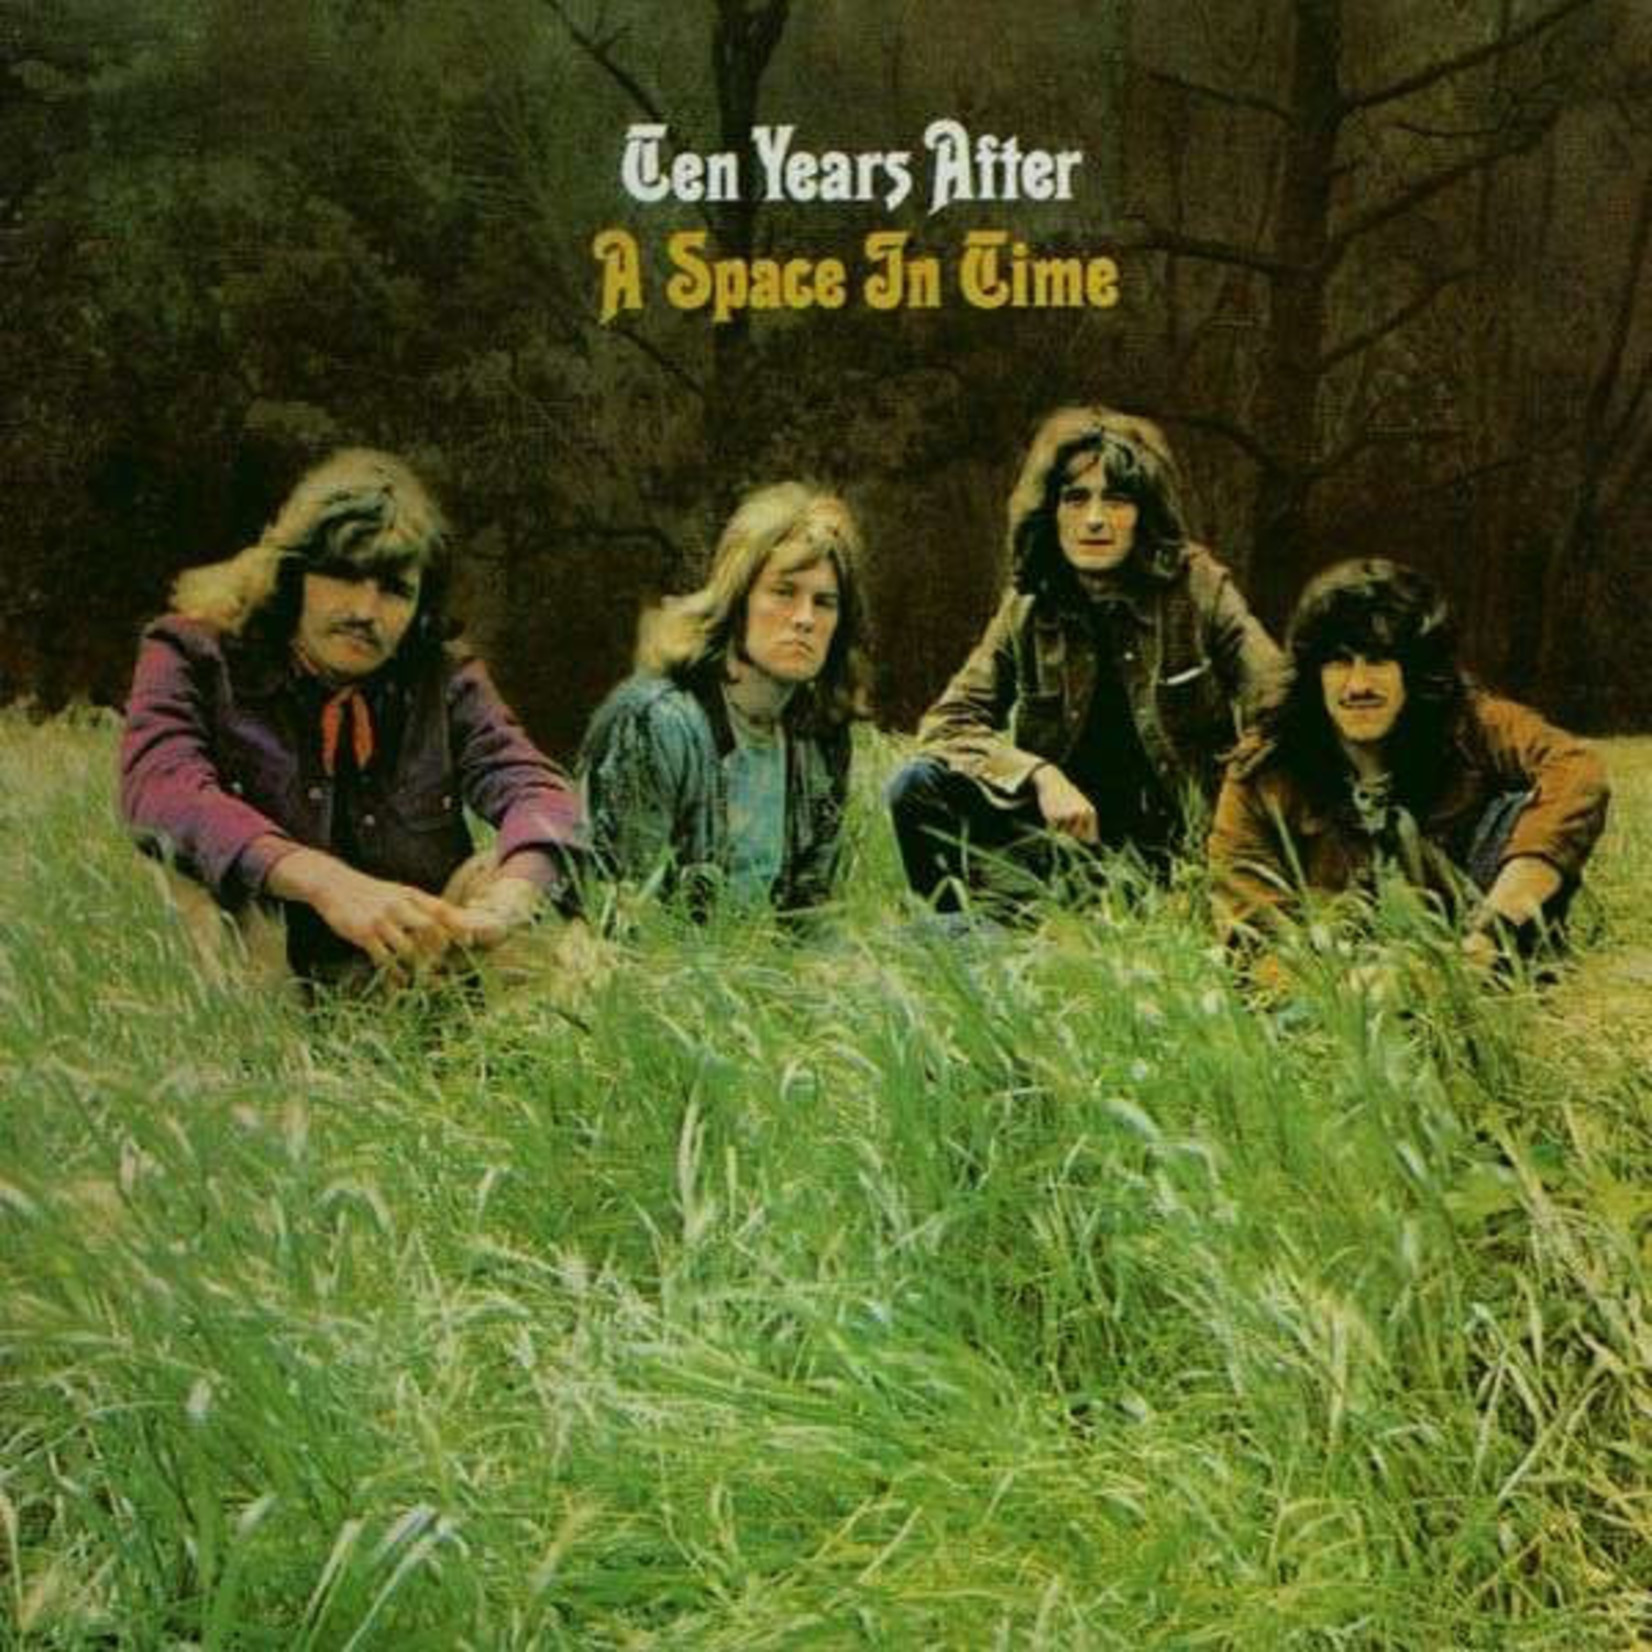 [New] Ten Years After - A Space In Time (2LP, 180g, 50th anniversary edition, indie clear vinyl)